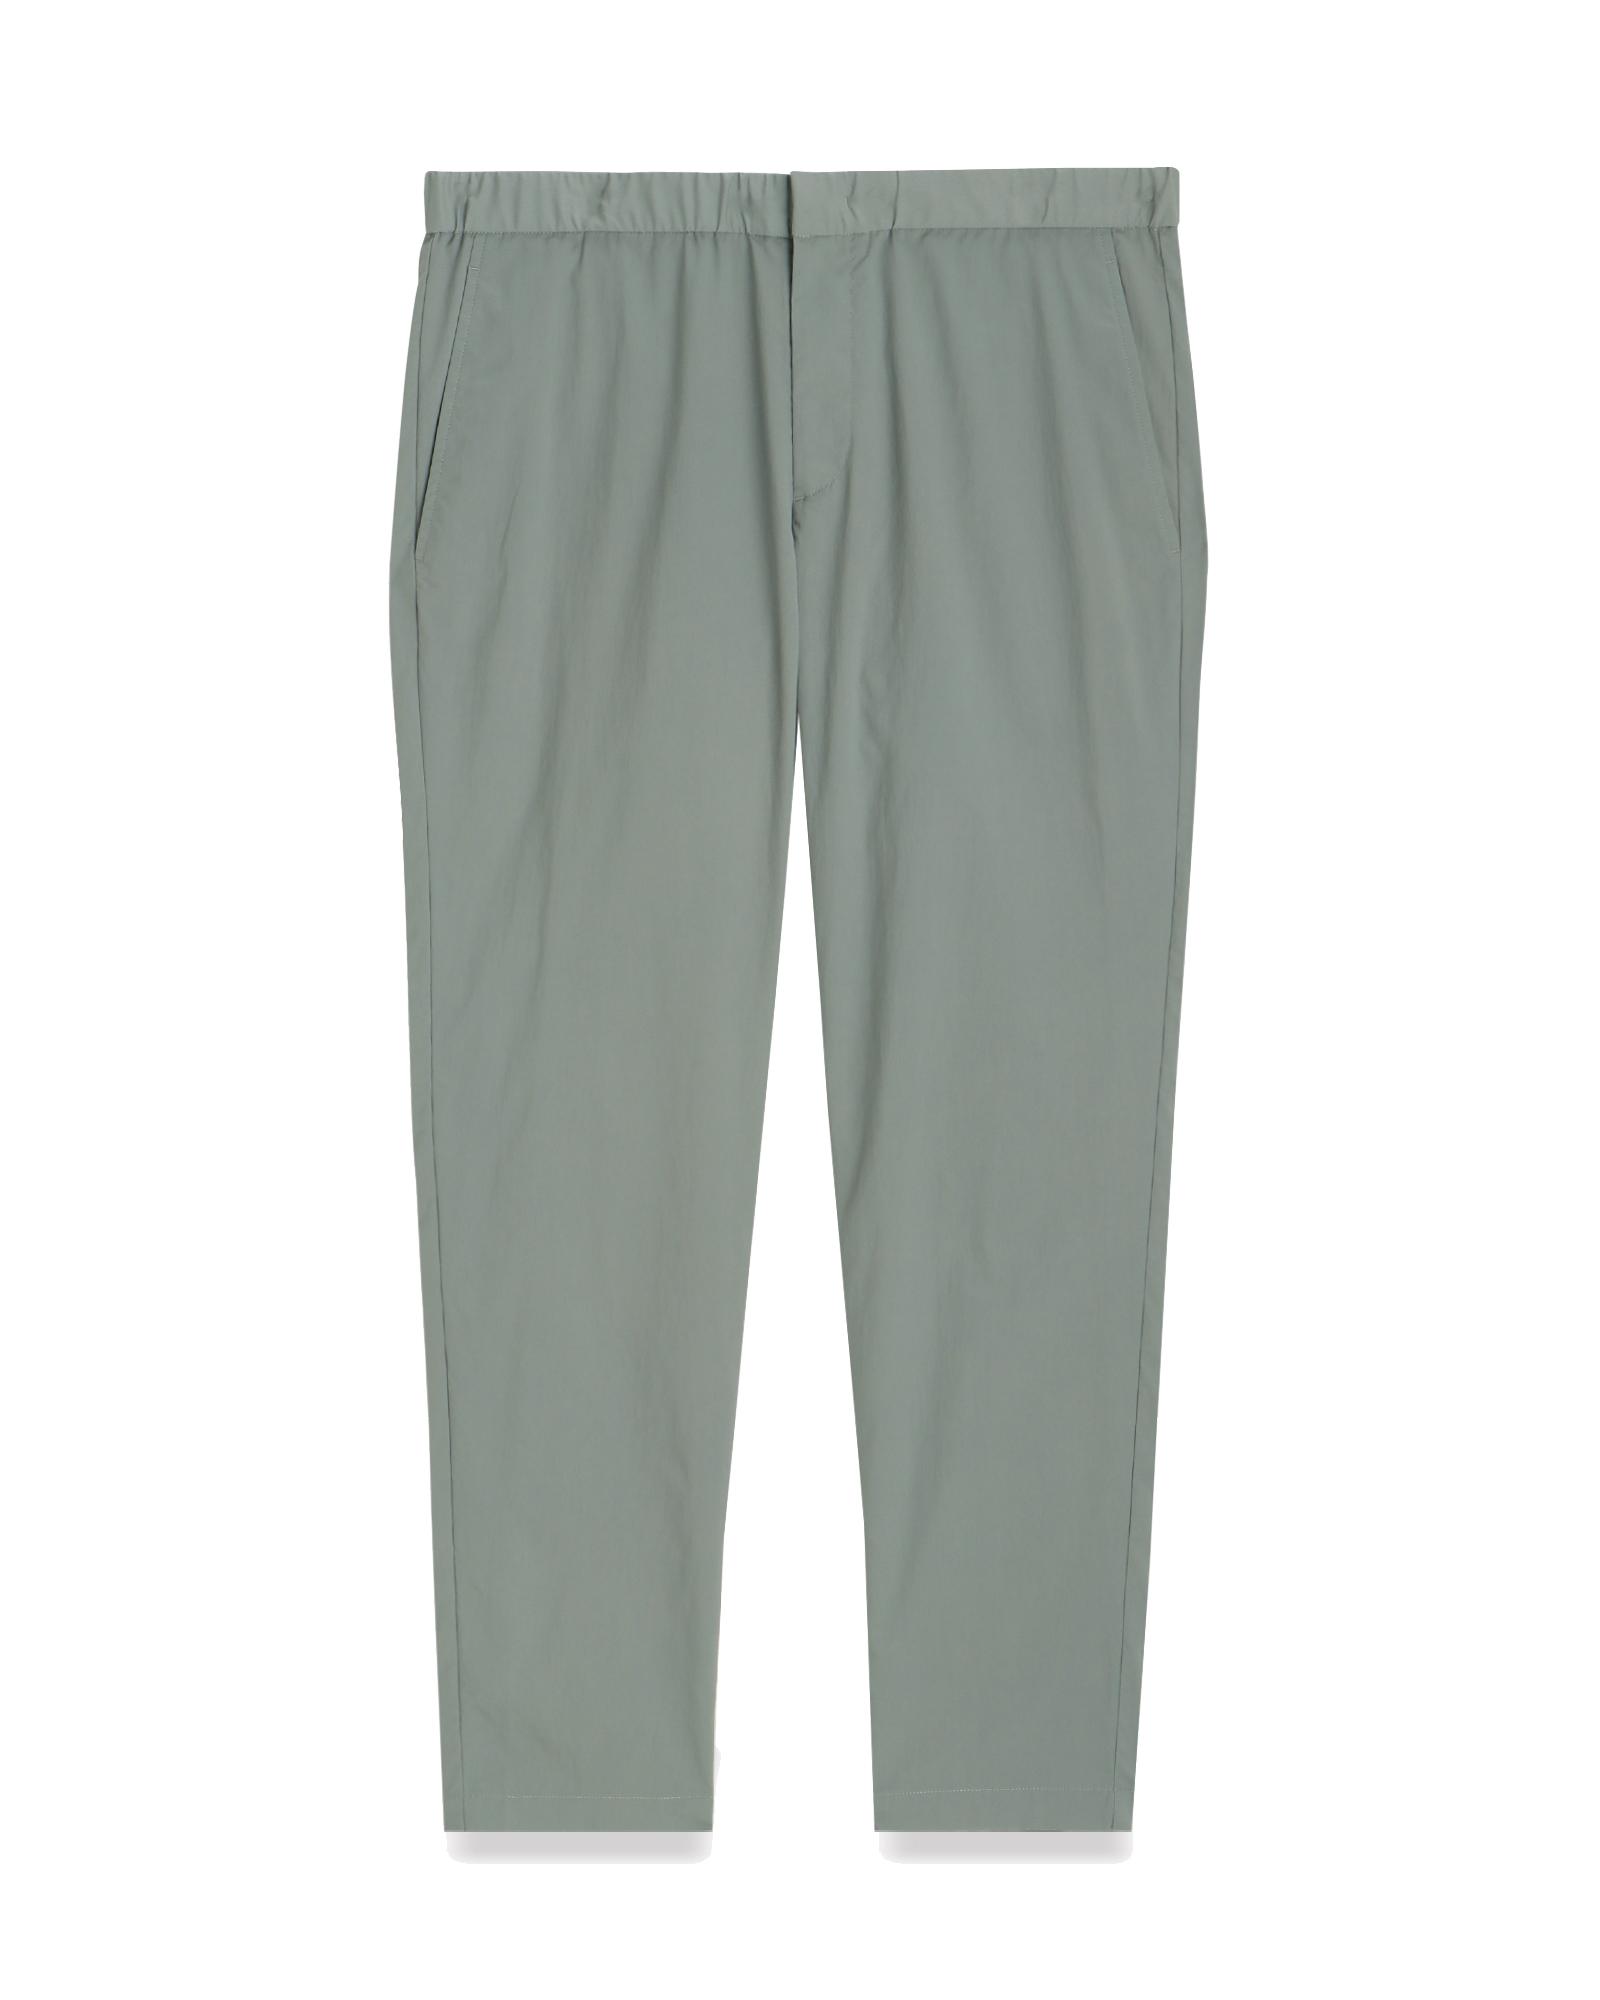 BEST SELLER PANTS | MEN（メンズ）｜Theory 公式通販サイト